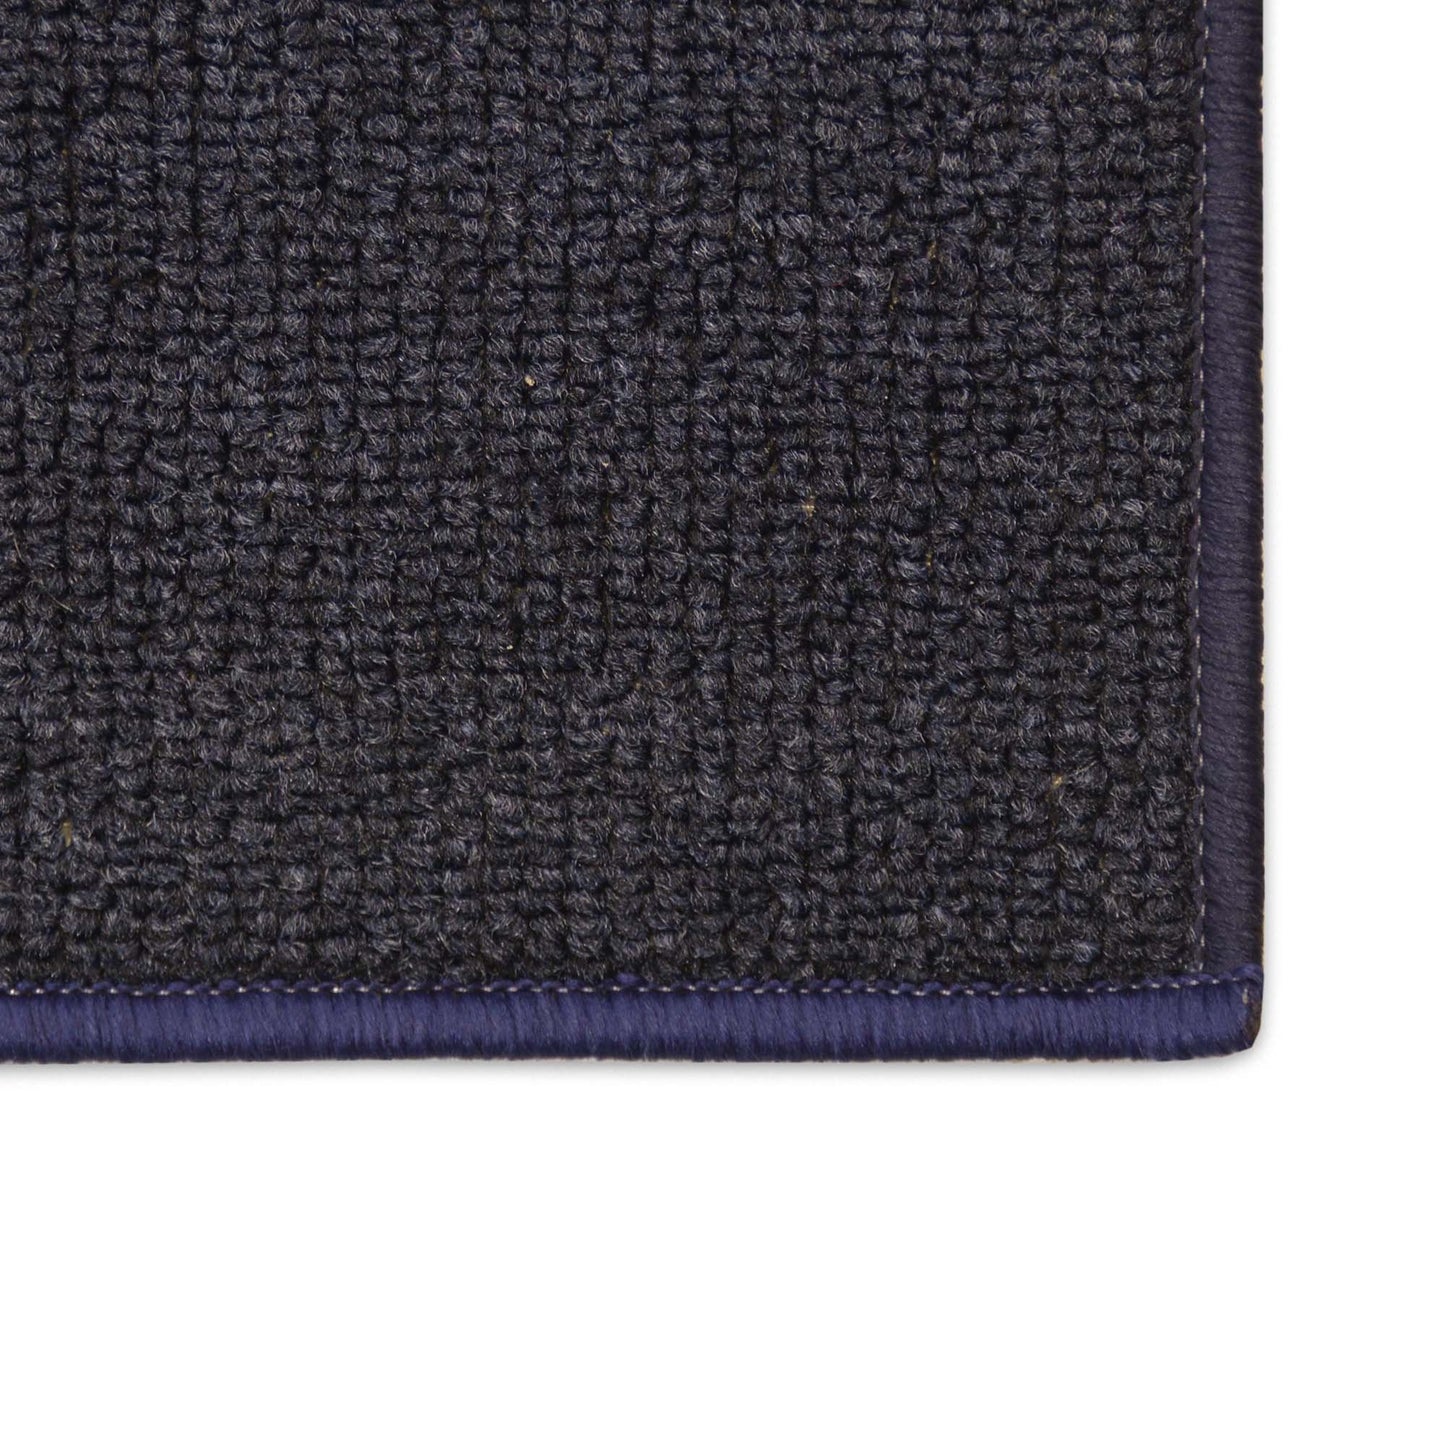 Machine Washable Custom Size Runner Rug Berber Solid Dark Navy Blue Skid Resistant Area Rug Runners Customize By Feet and 26 inch Width